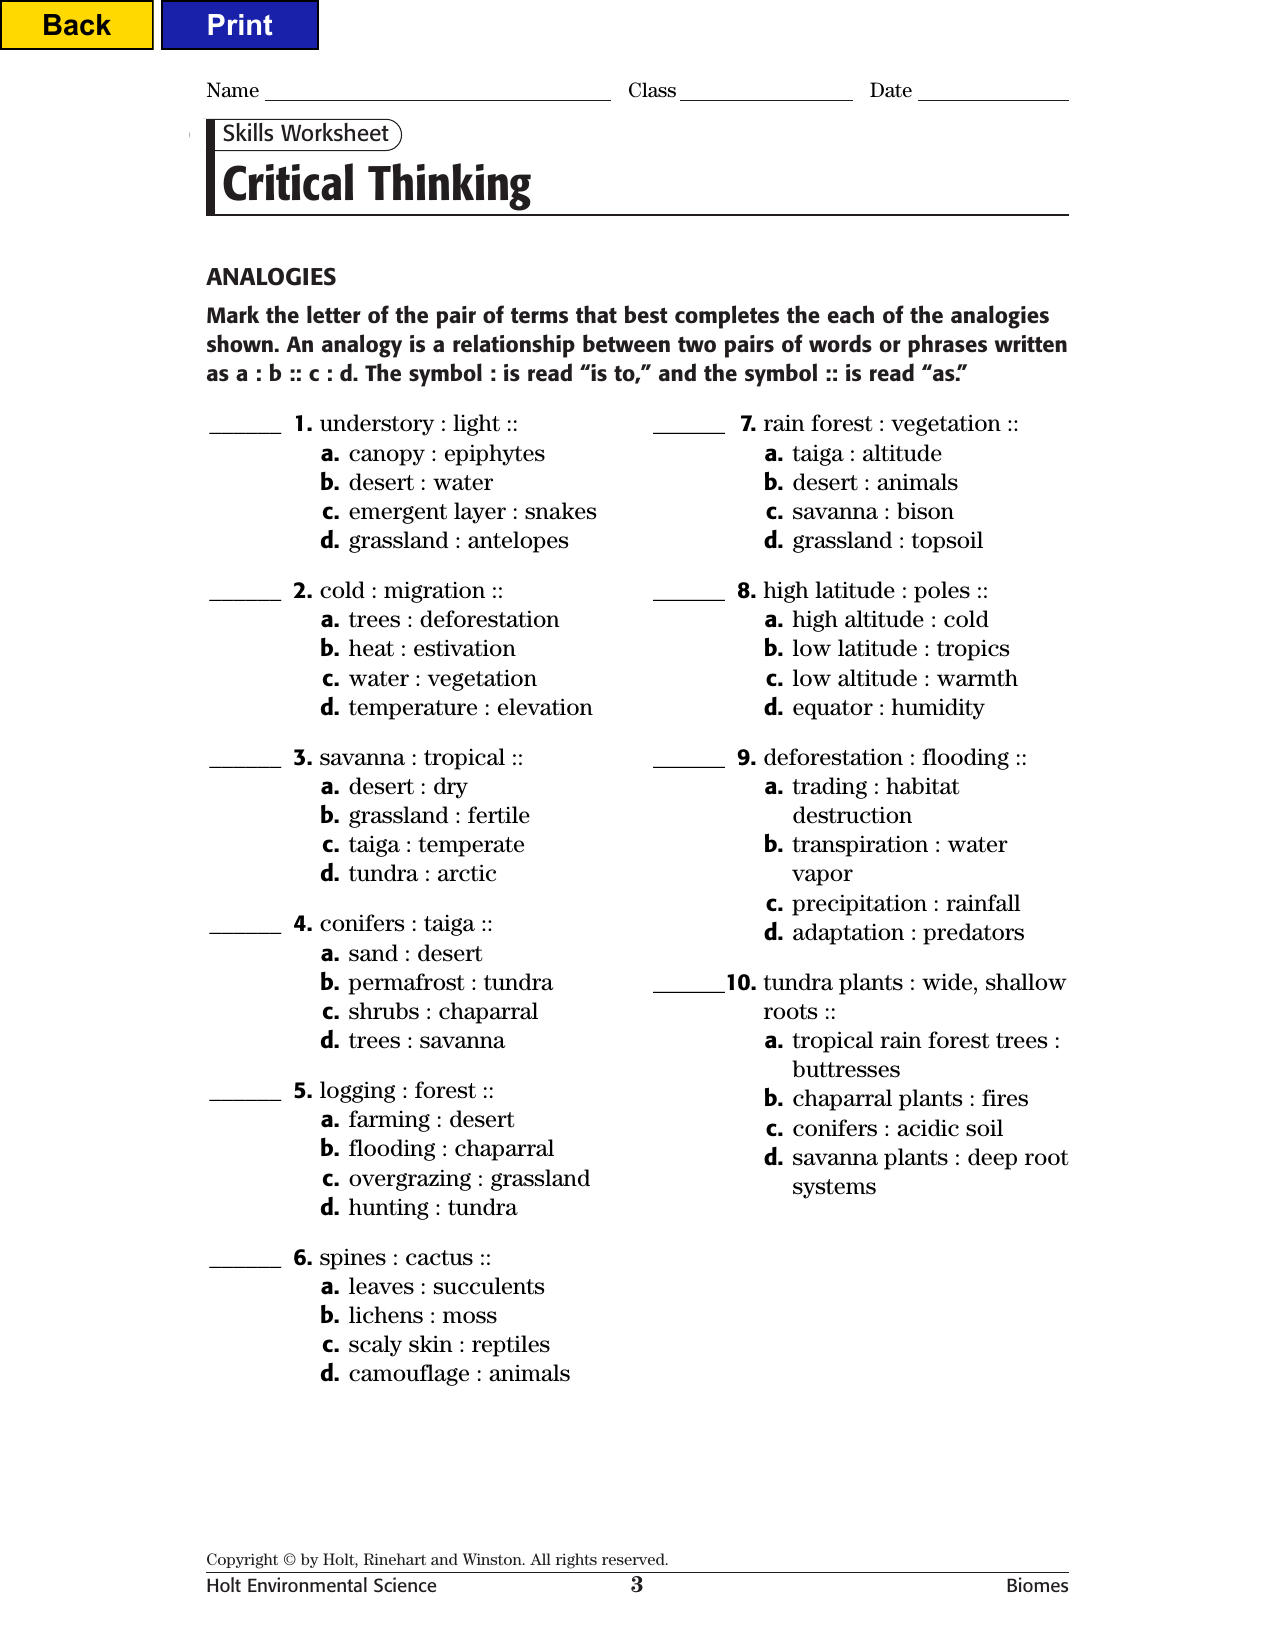 Critical Thinking In Skills Worksheet Critical Thinking Analogies Environmental Science